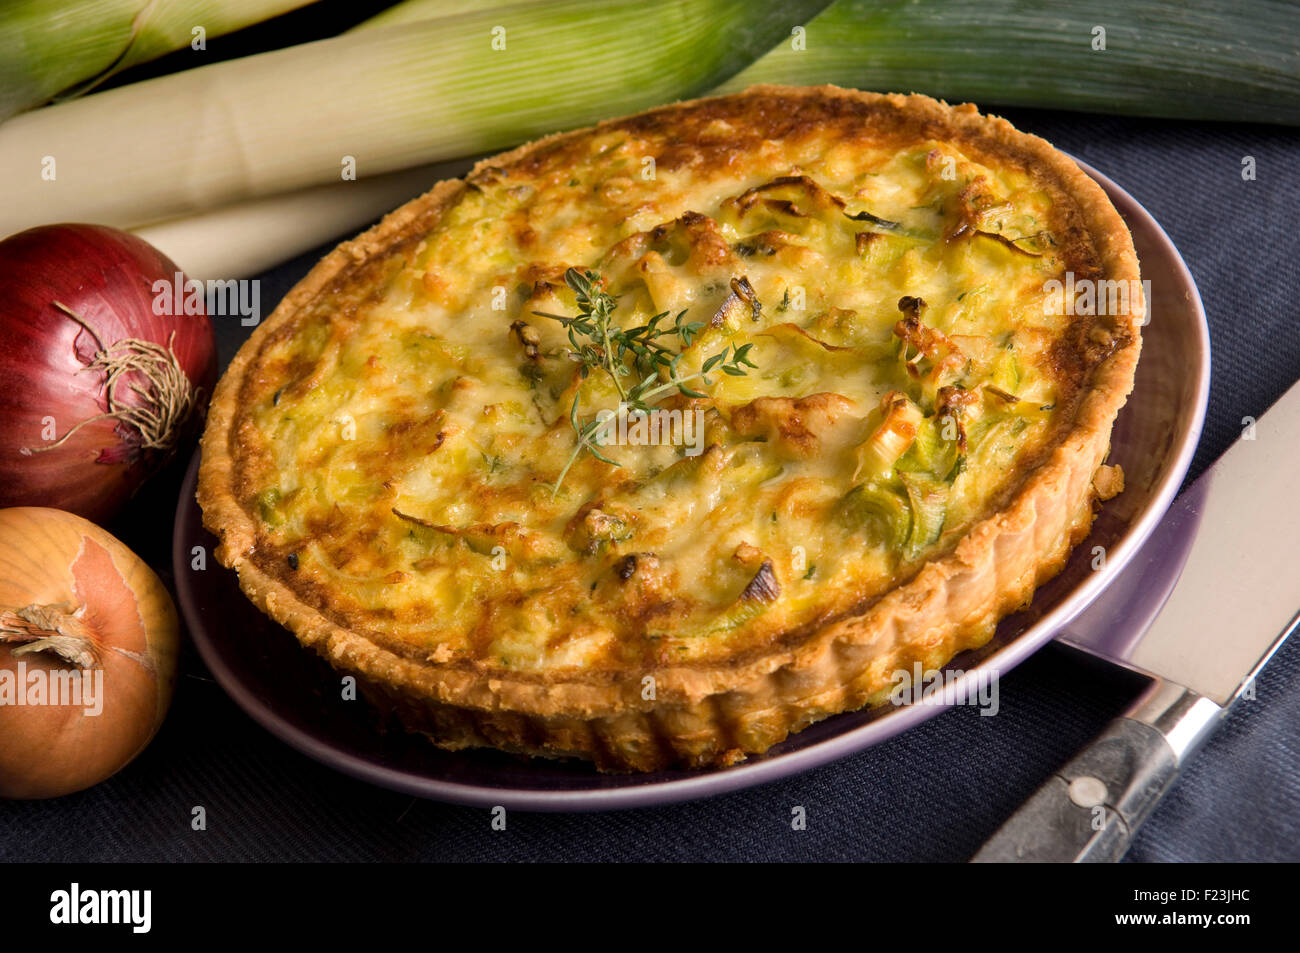 Vegetable quiche. a UK food meal cook cooking cuisine veg vegetables Stock Photo